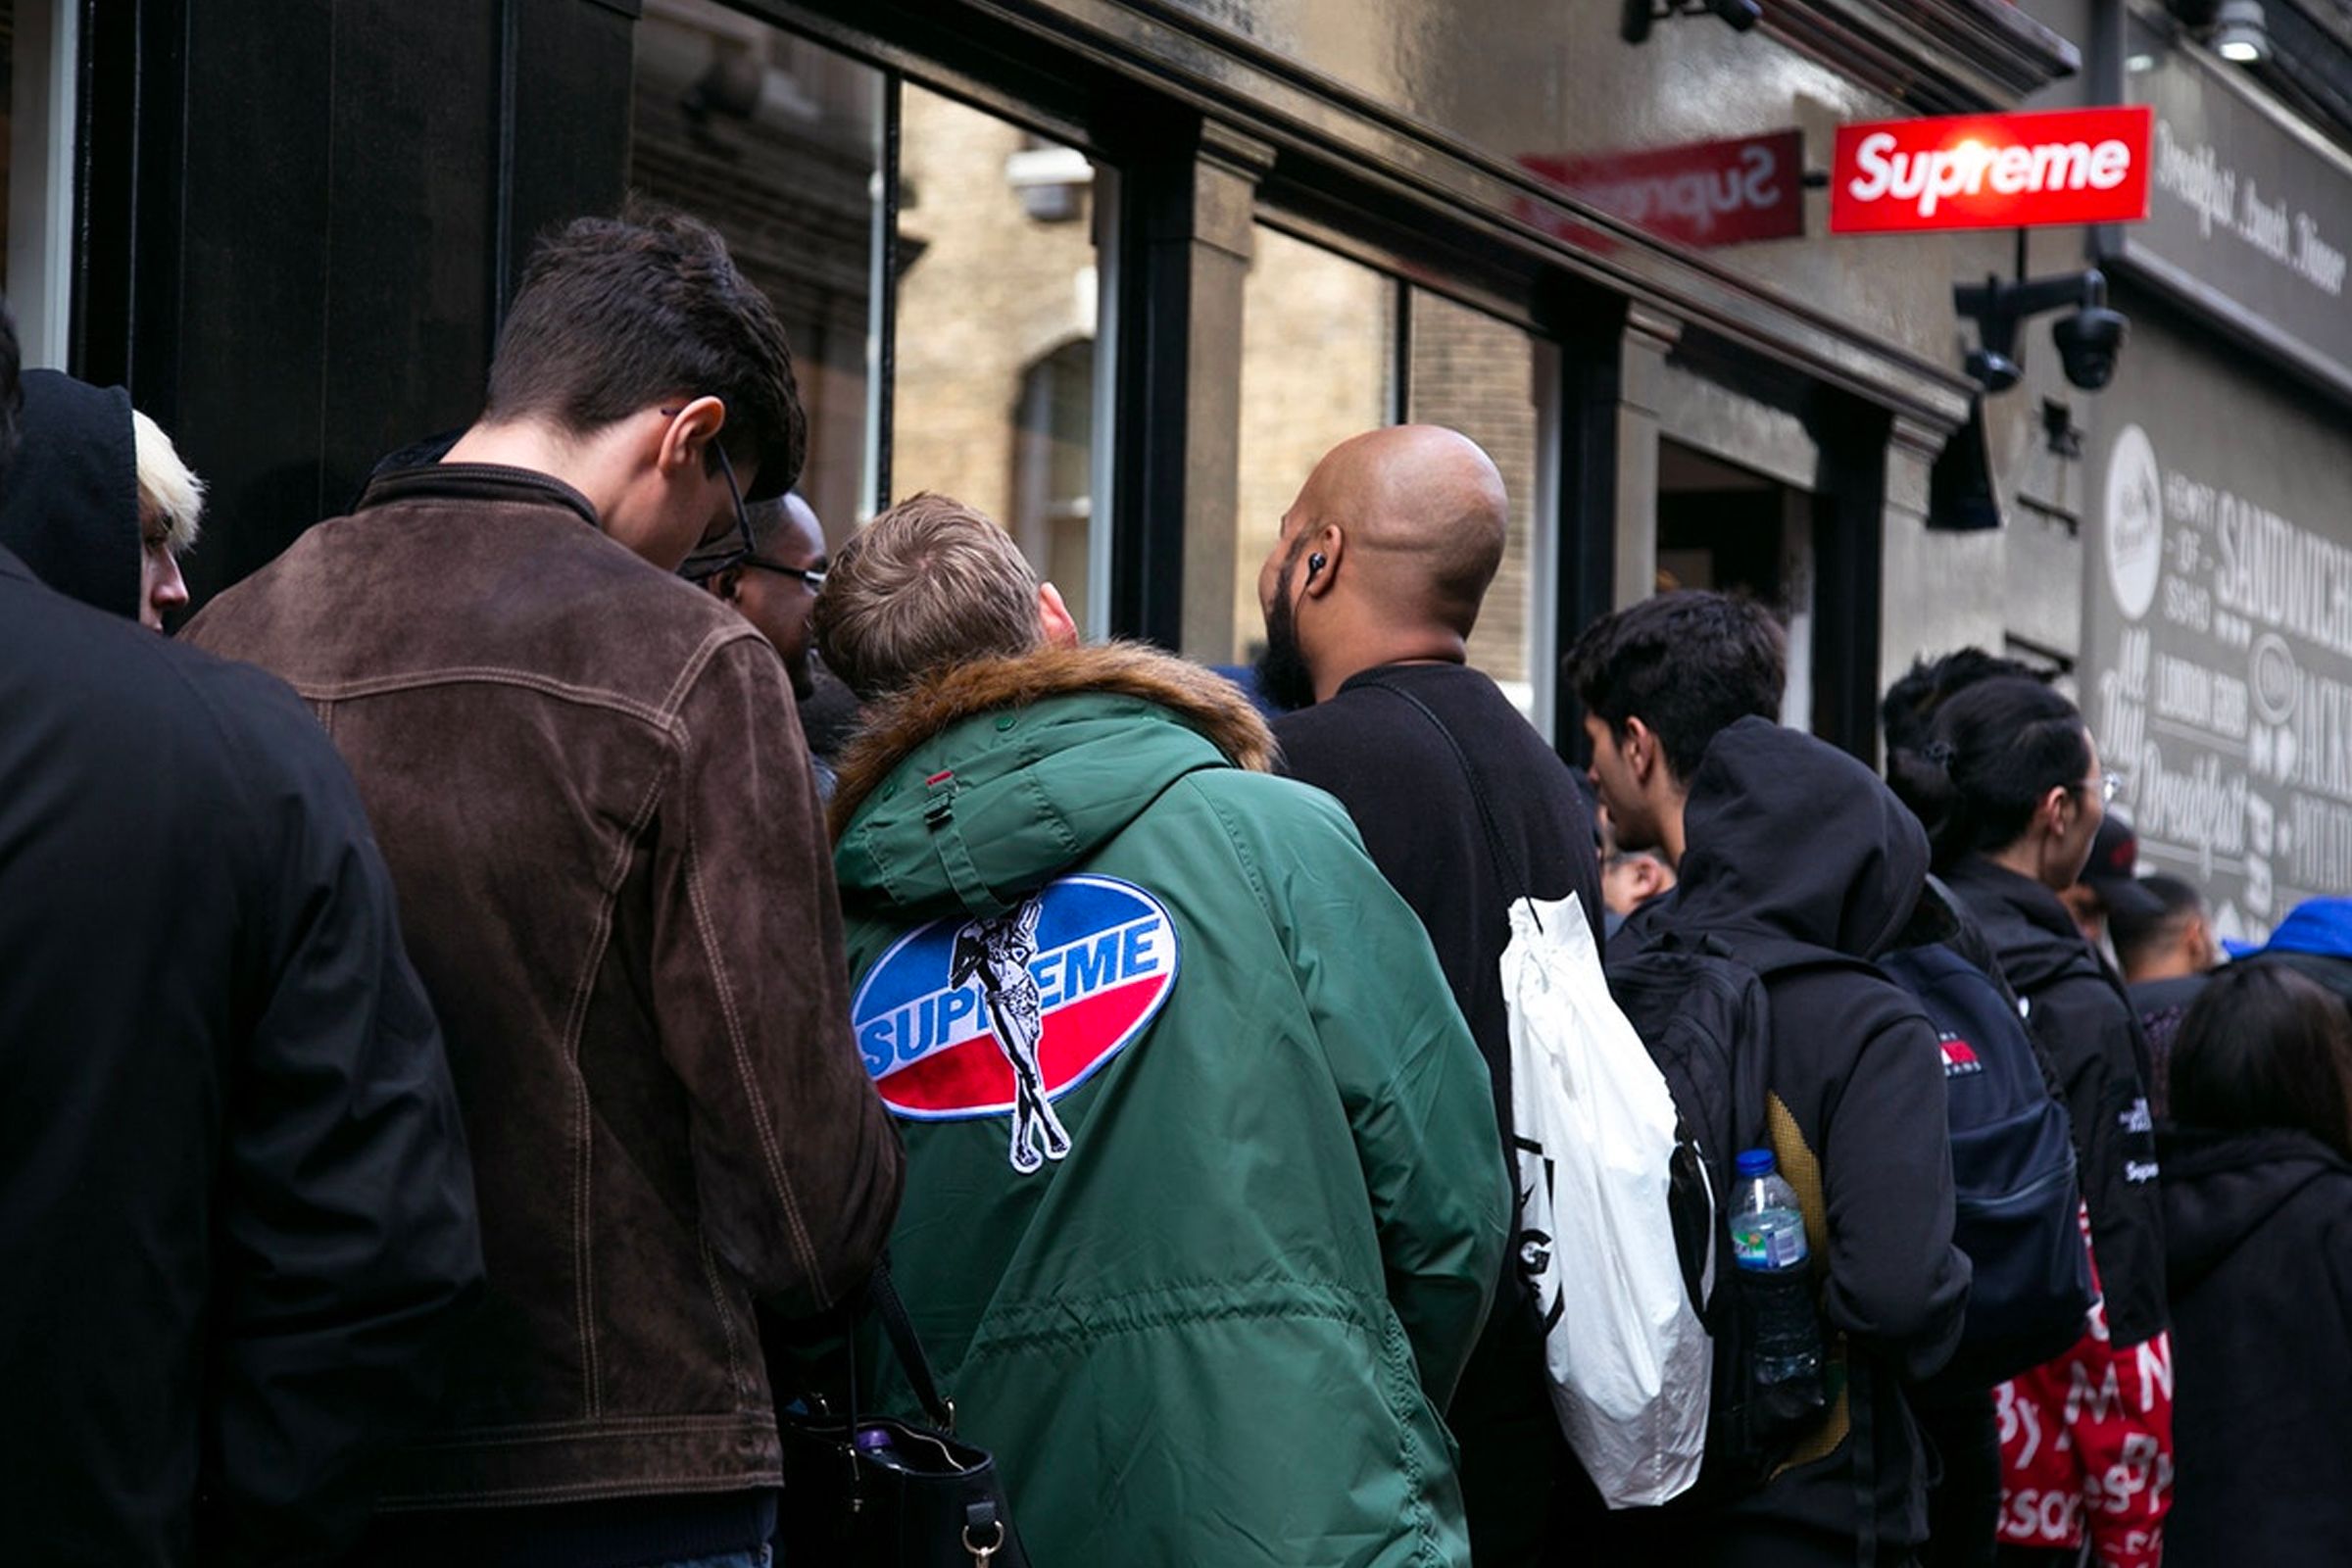 How Supreme went from small NYC skateboard shop to a global phenomenon